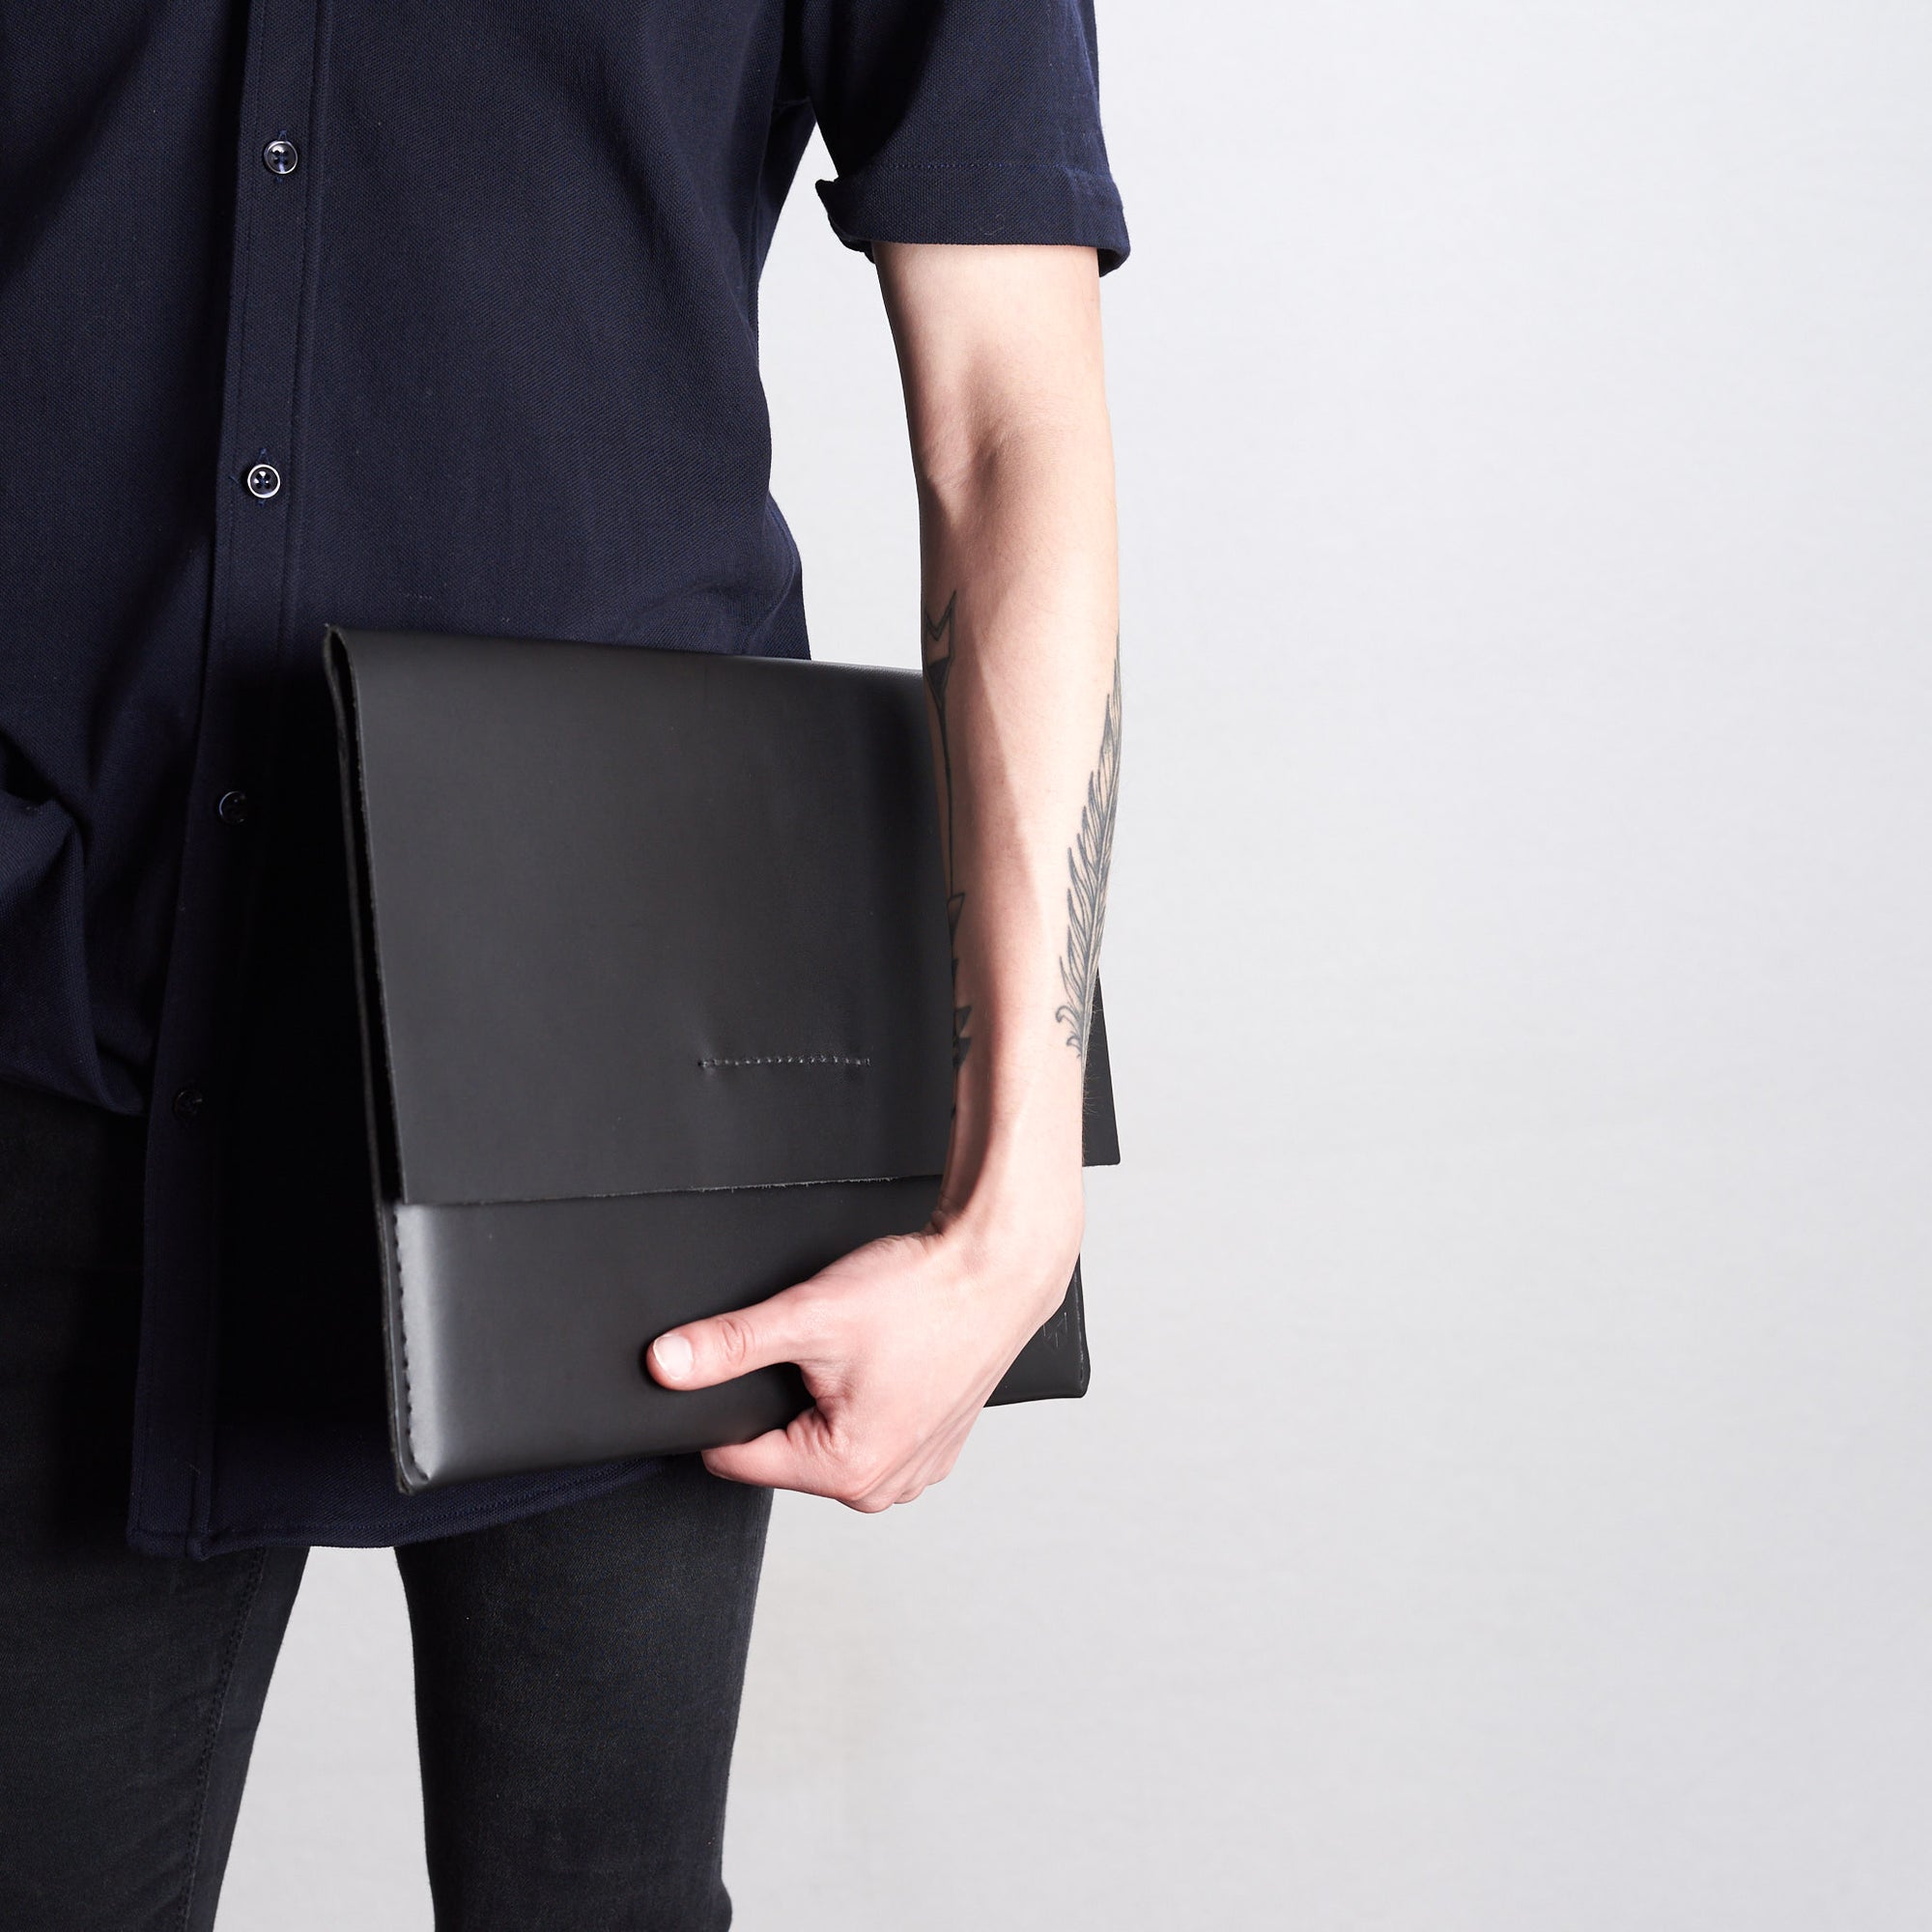 Style side model view of case. Black draftsman 1 case by Capra Leather. Microsoft Surface sleeve.